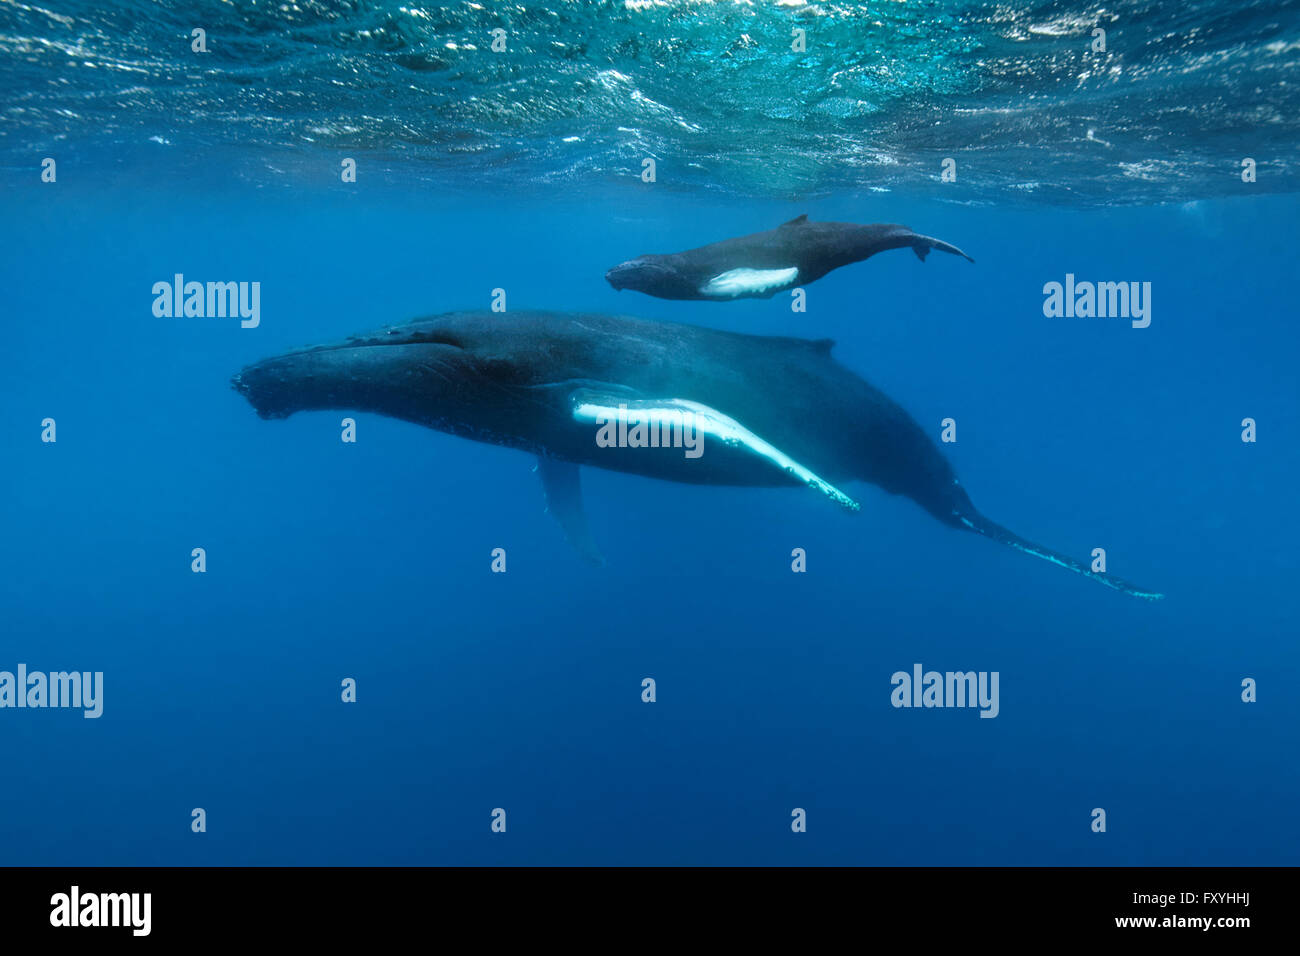 Humpback whale (Megaptera novaeangliae), female, cow, with young, calf, swims in the open ocean, Atlantic Ocean, Silver Bank Stock Photo